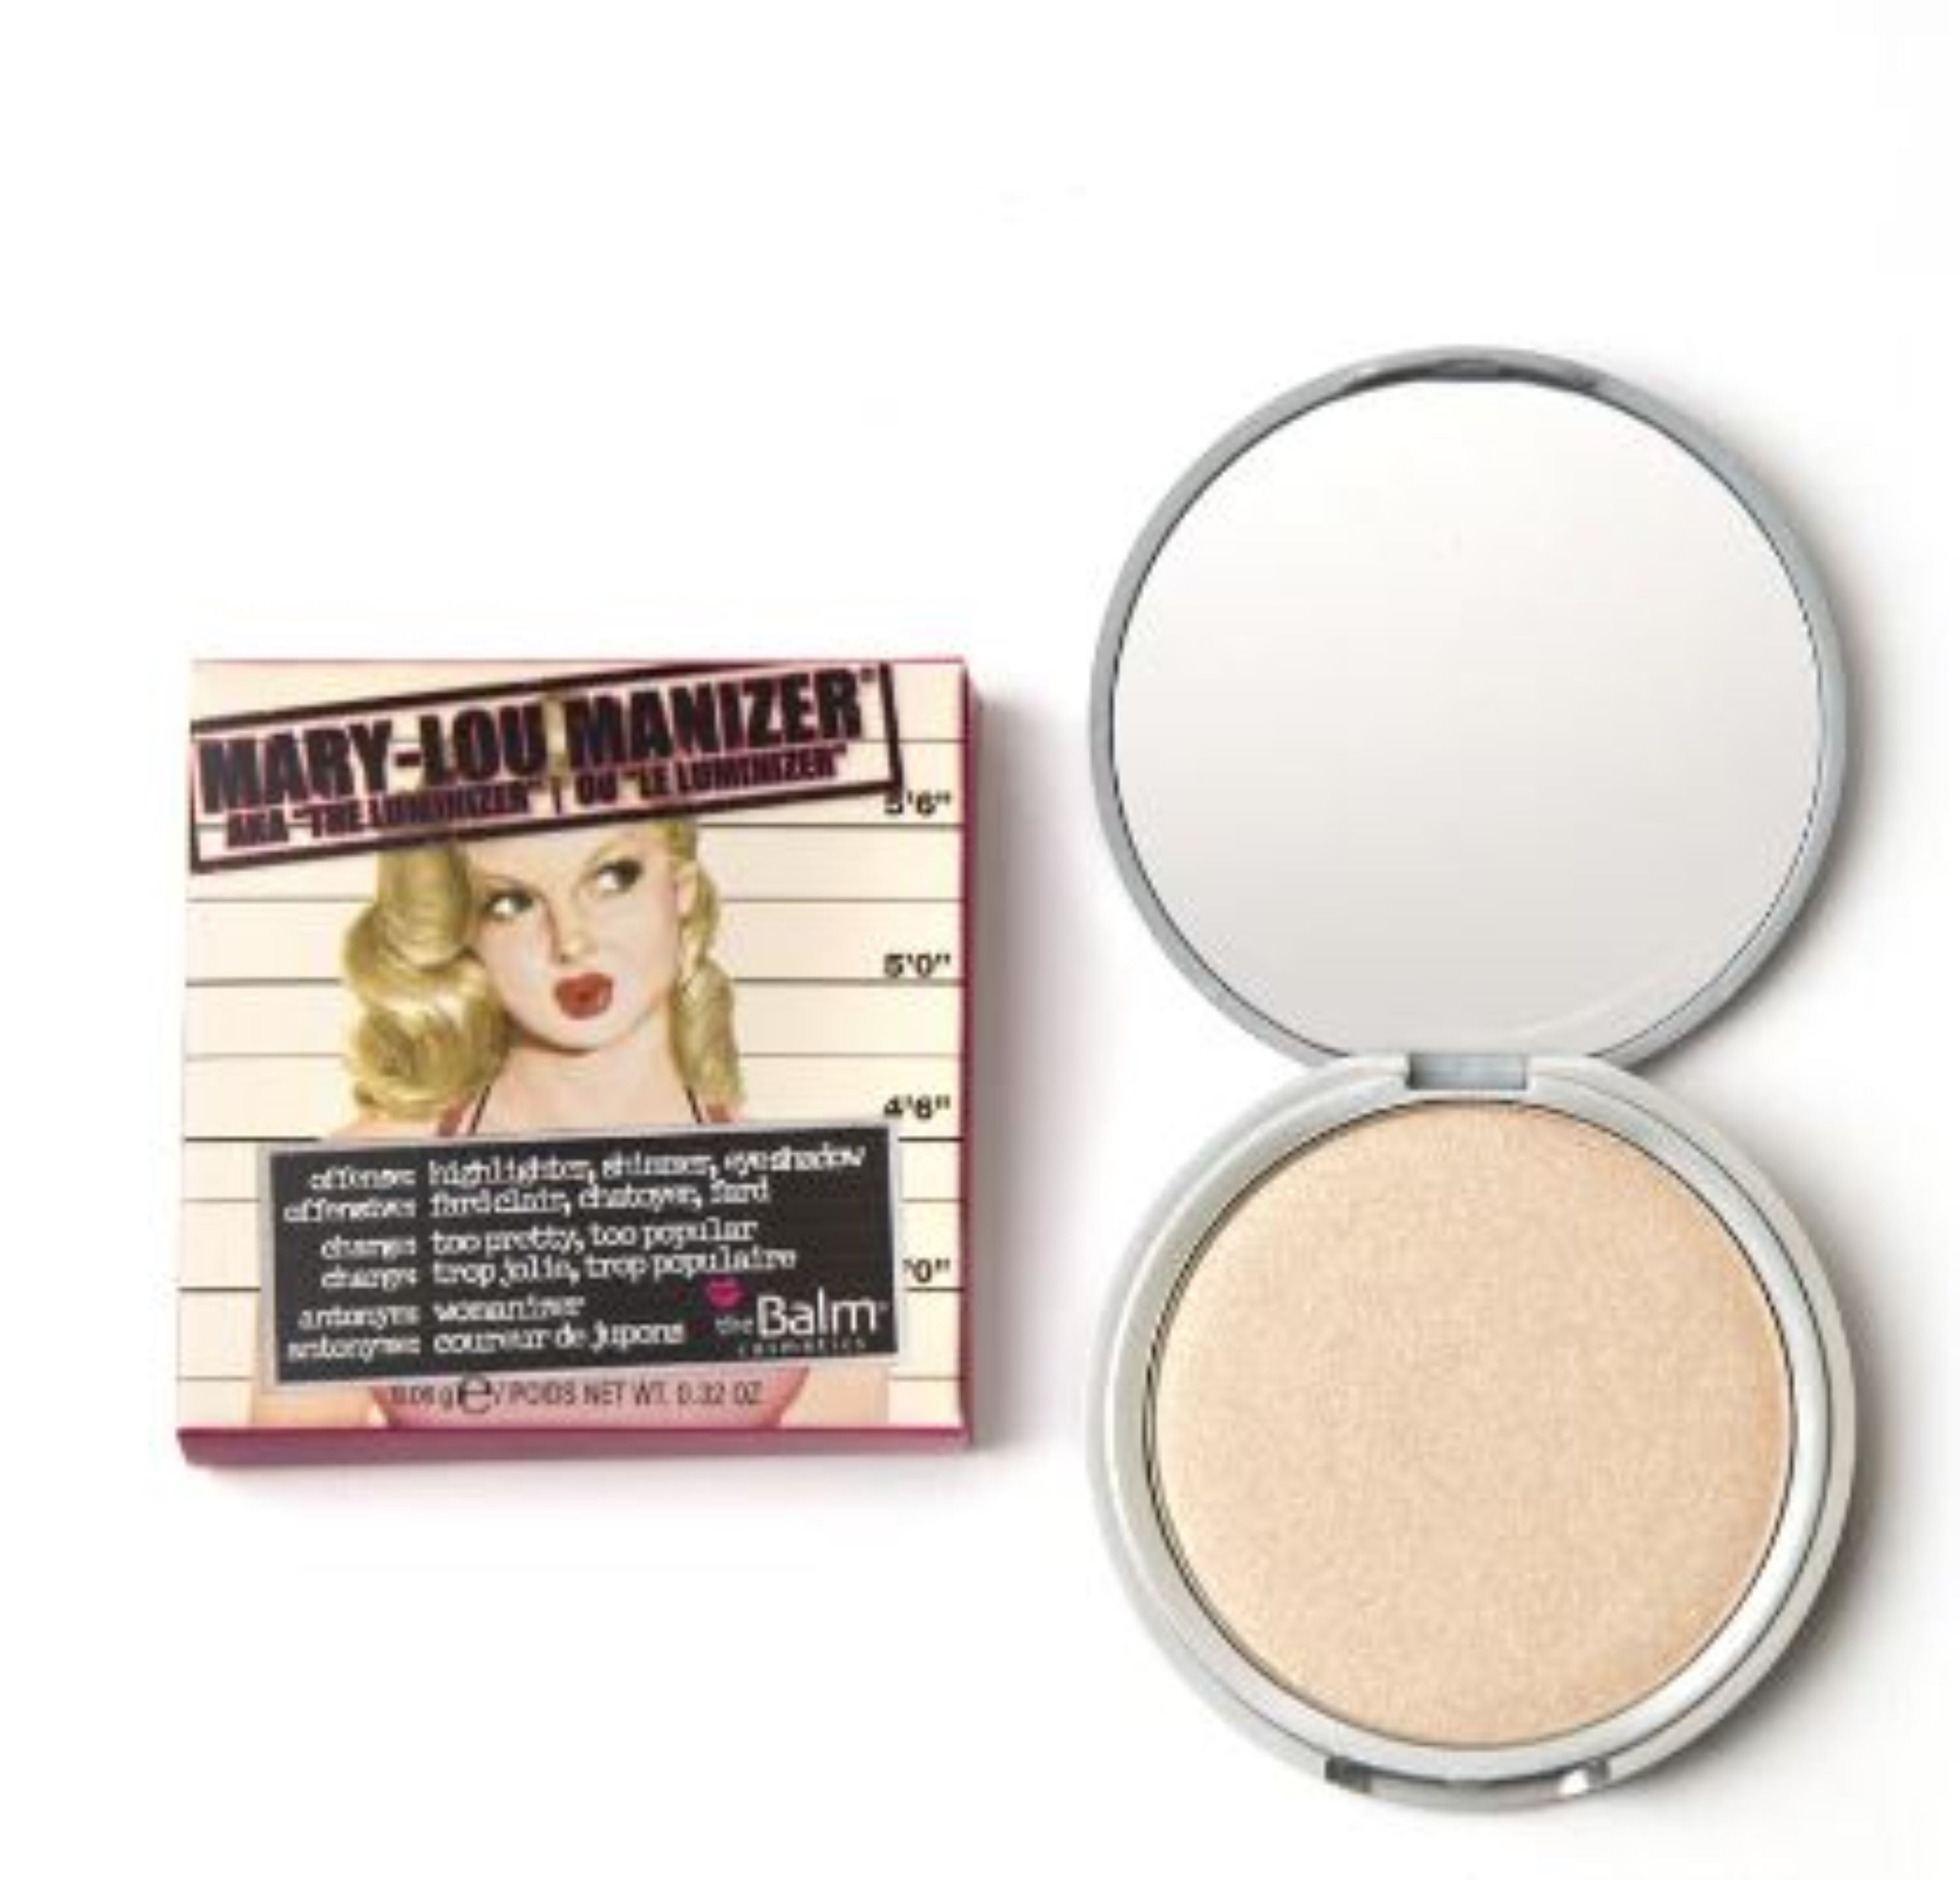 Thebalm Mary-Lou Manizer Highlighter, Shadow & Shimmer, 0.30 Oz - image 1 of 1